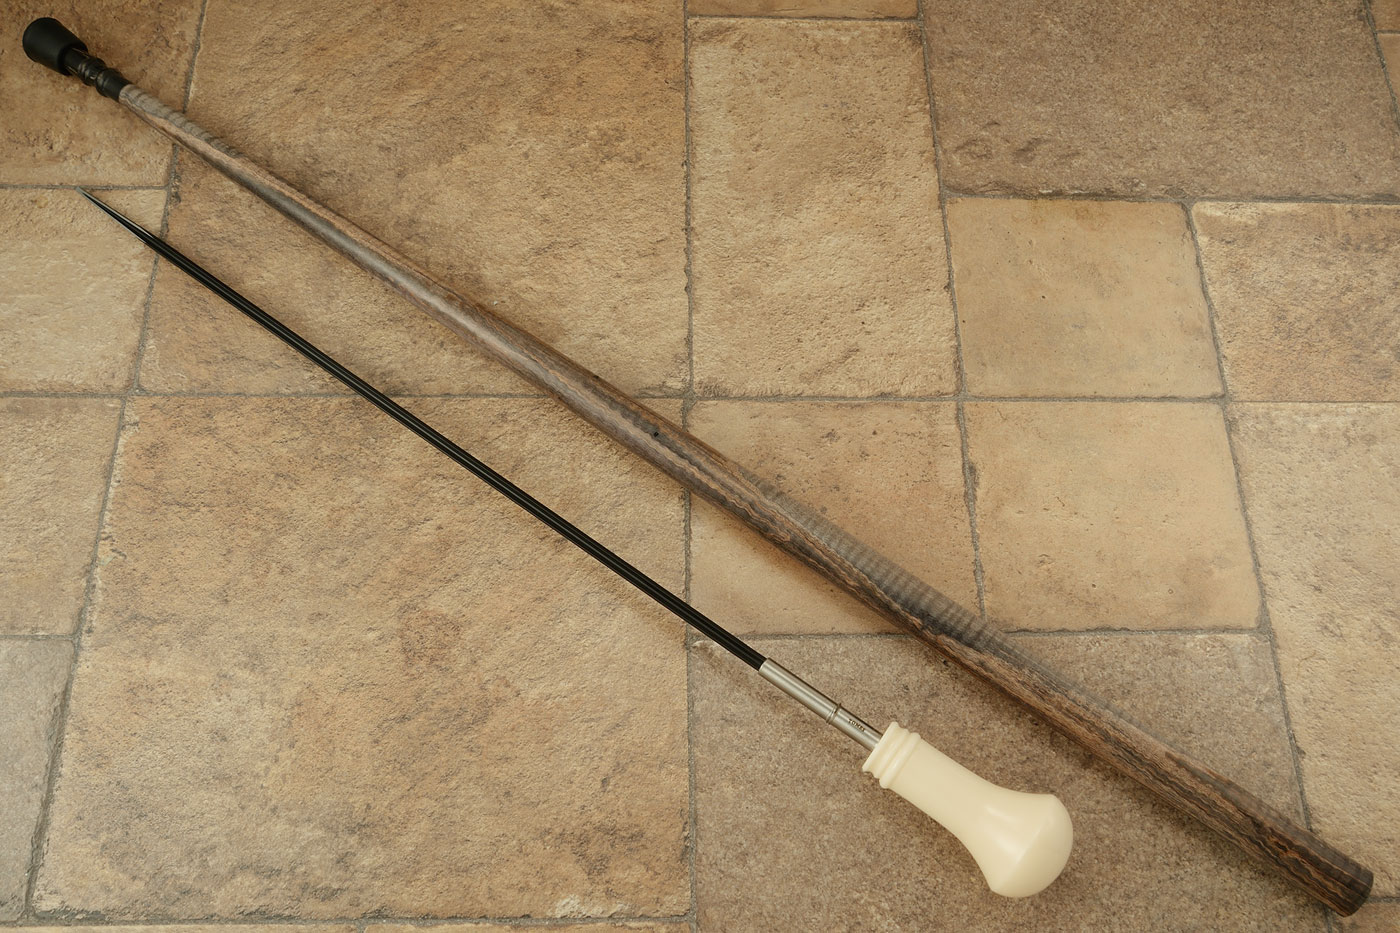 Sword Cane with Fiddleback Maple